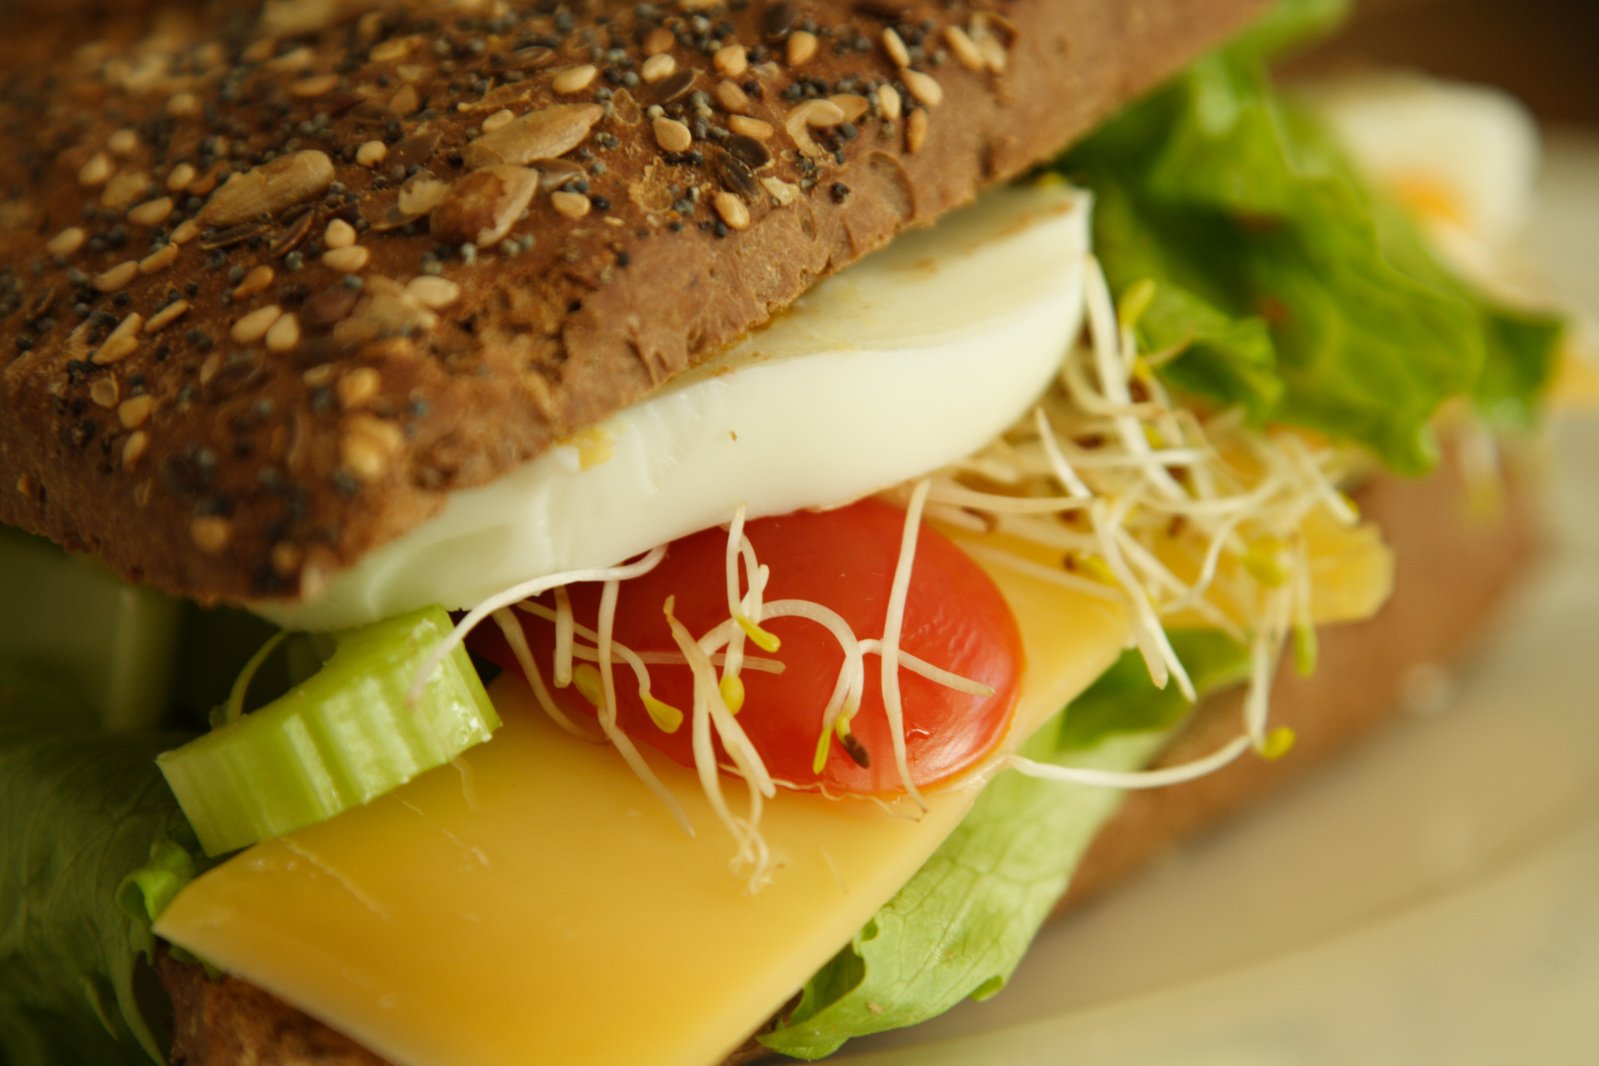 a sub sandwich topped with lettuce, tomatoes and cheese